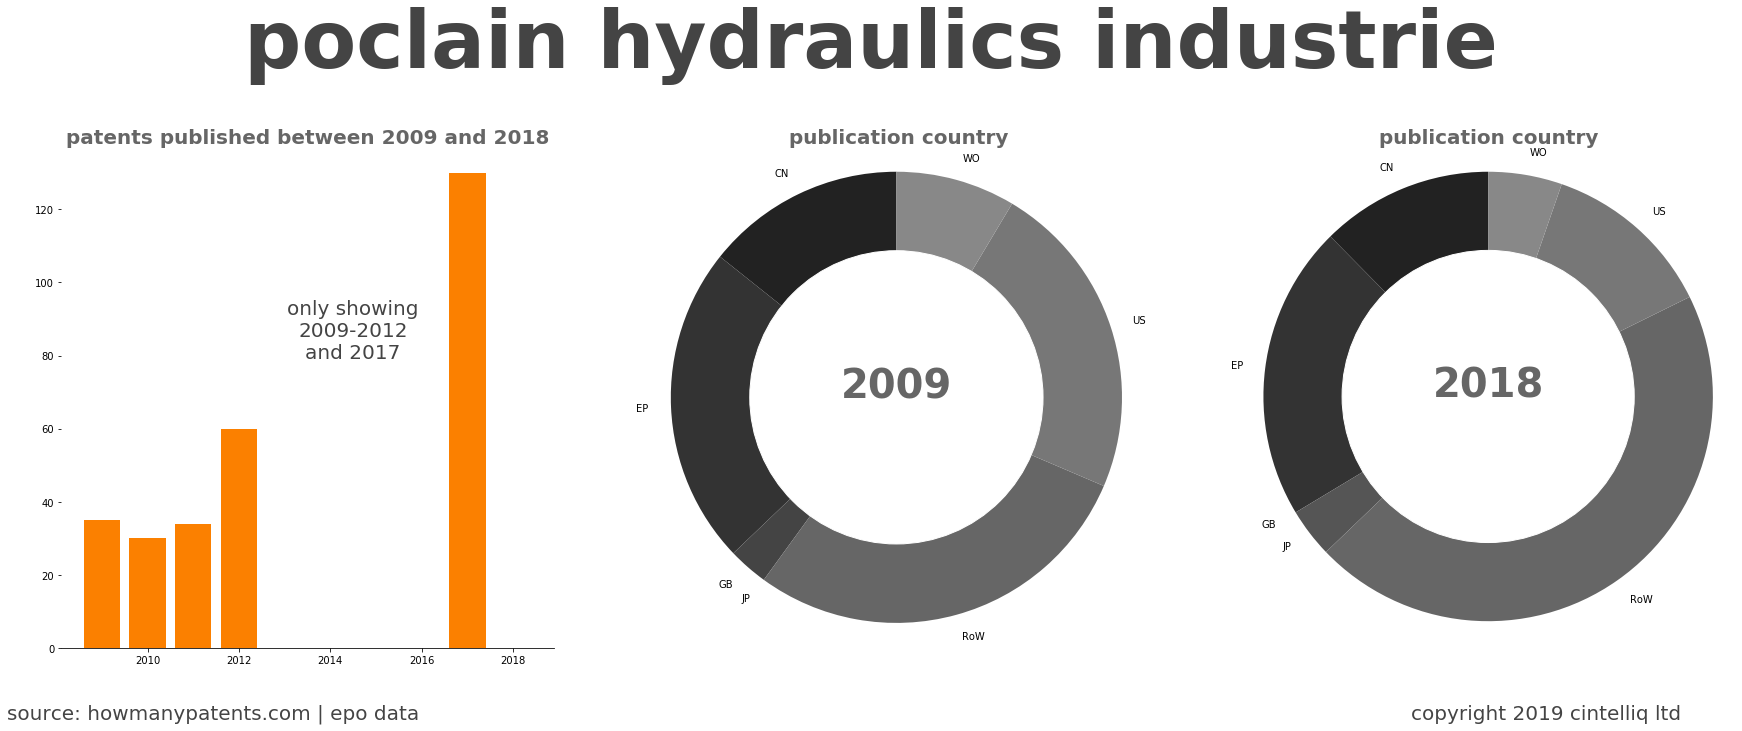 summary of patents for Poclain Hydraulics Industrie